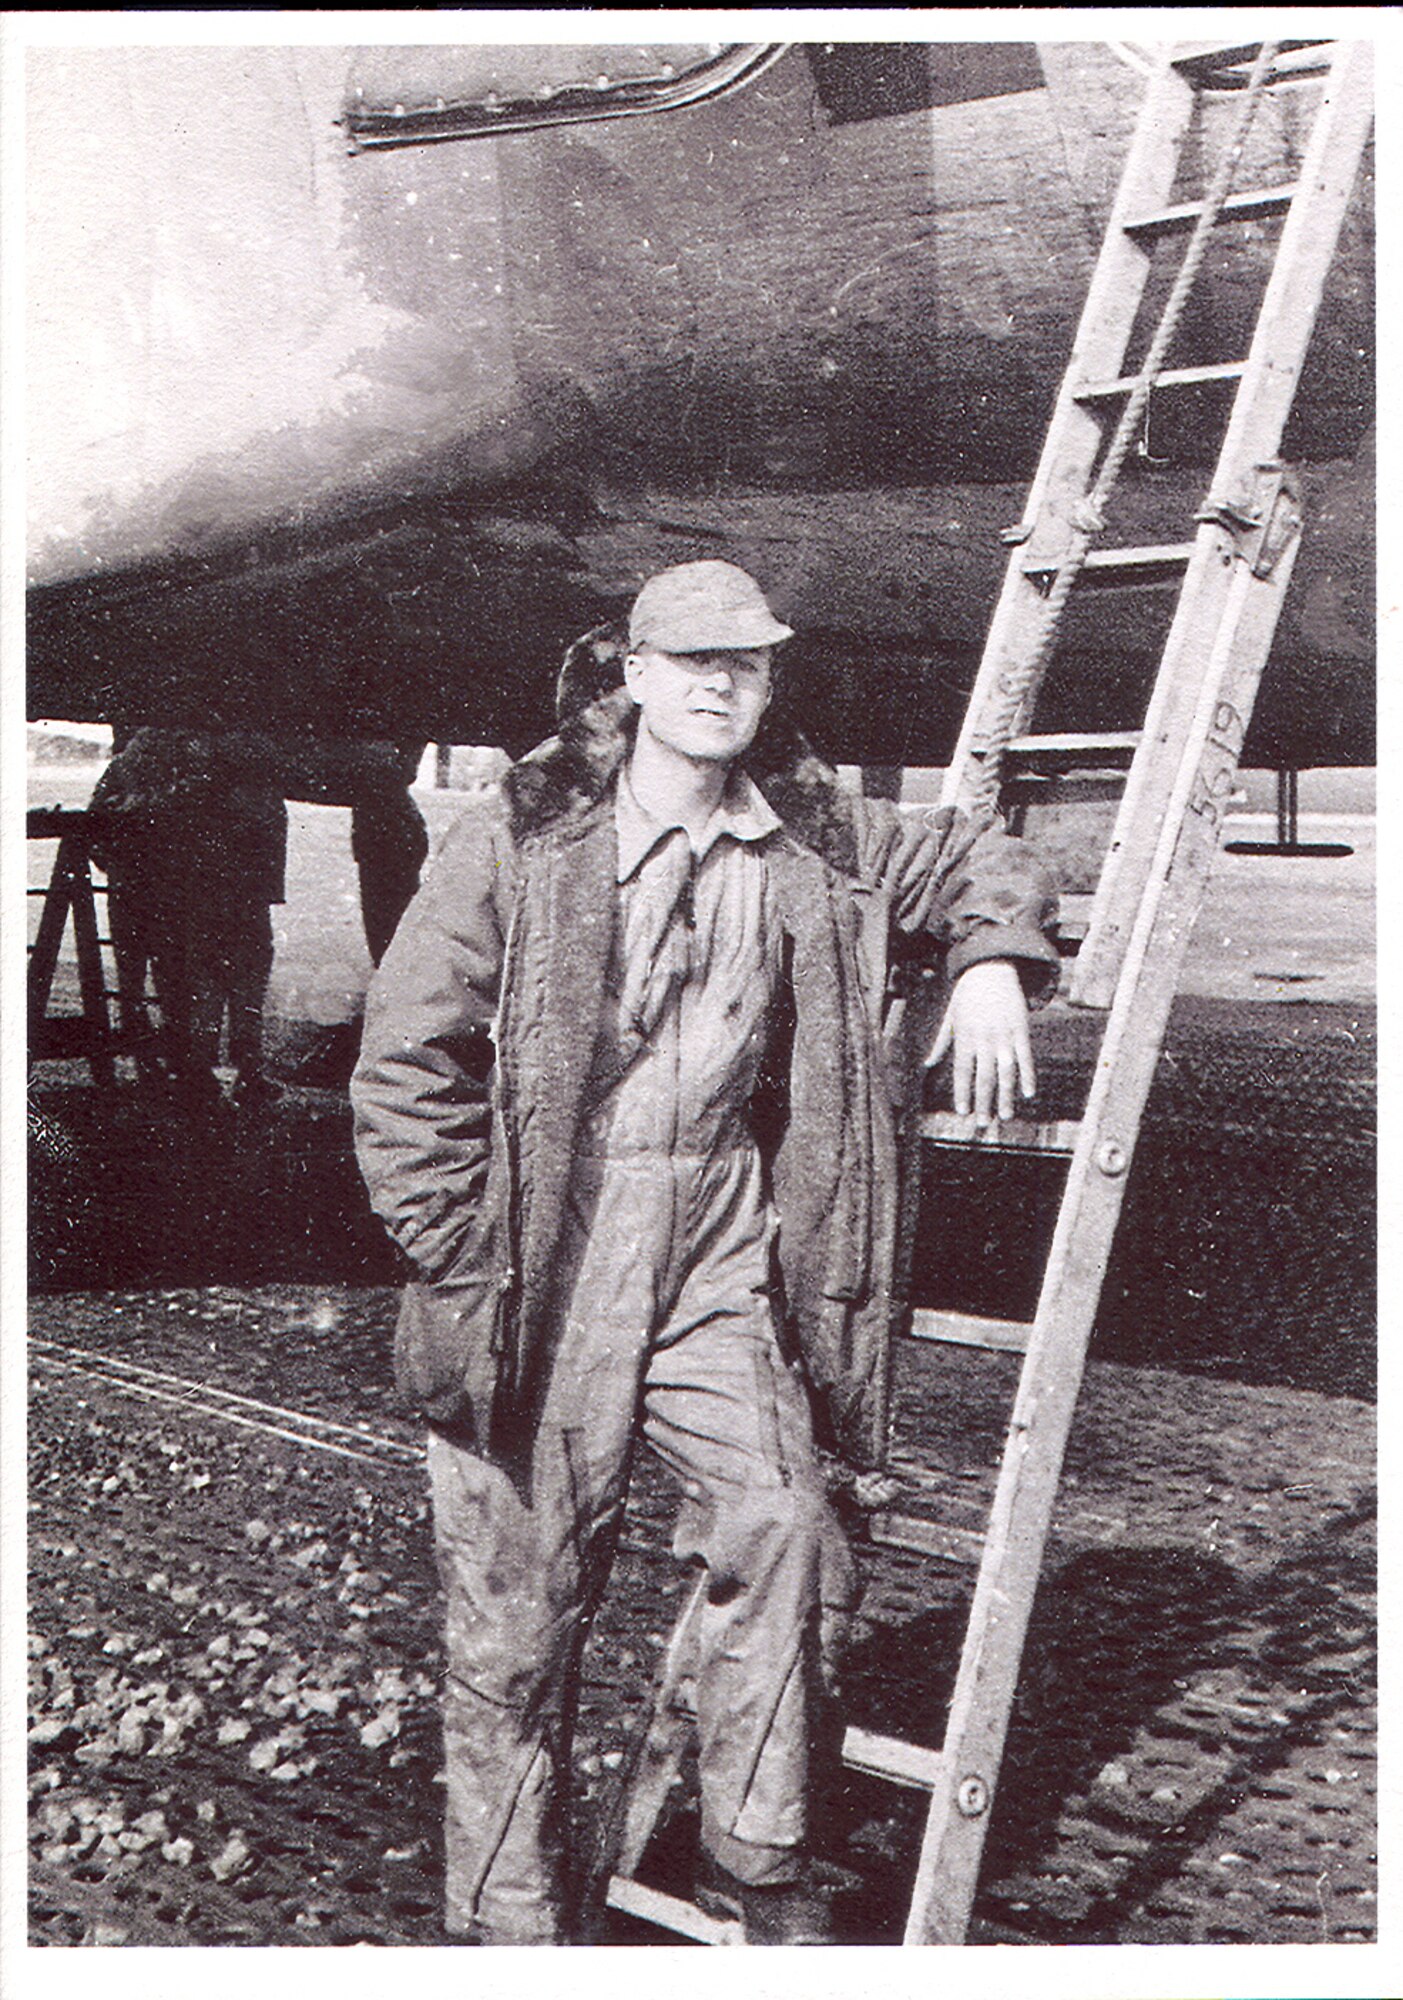 Retired Chief Master Sgt. Wallace Liggett stands next to a C-54 cargo aircraft in the midst of the Berlin Airlift. He was a crew chief and flew 105 missions into Berlin as part of the largest airlift in history at the time. Over the course of his career, he
witnessed and took part in many historical events of the Air Force, becoming one of the service’s first senior and then chief master sergeants. (courtesy photo)